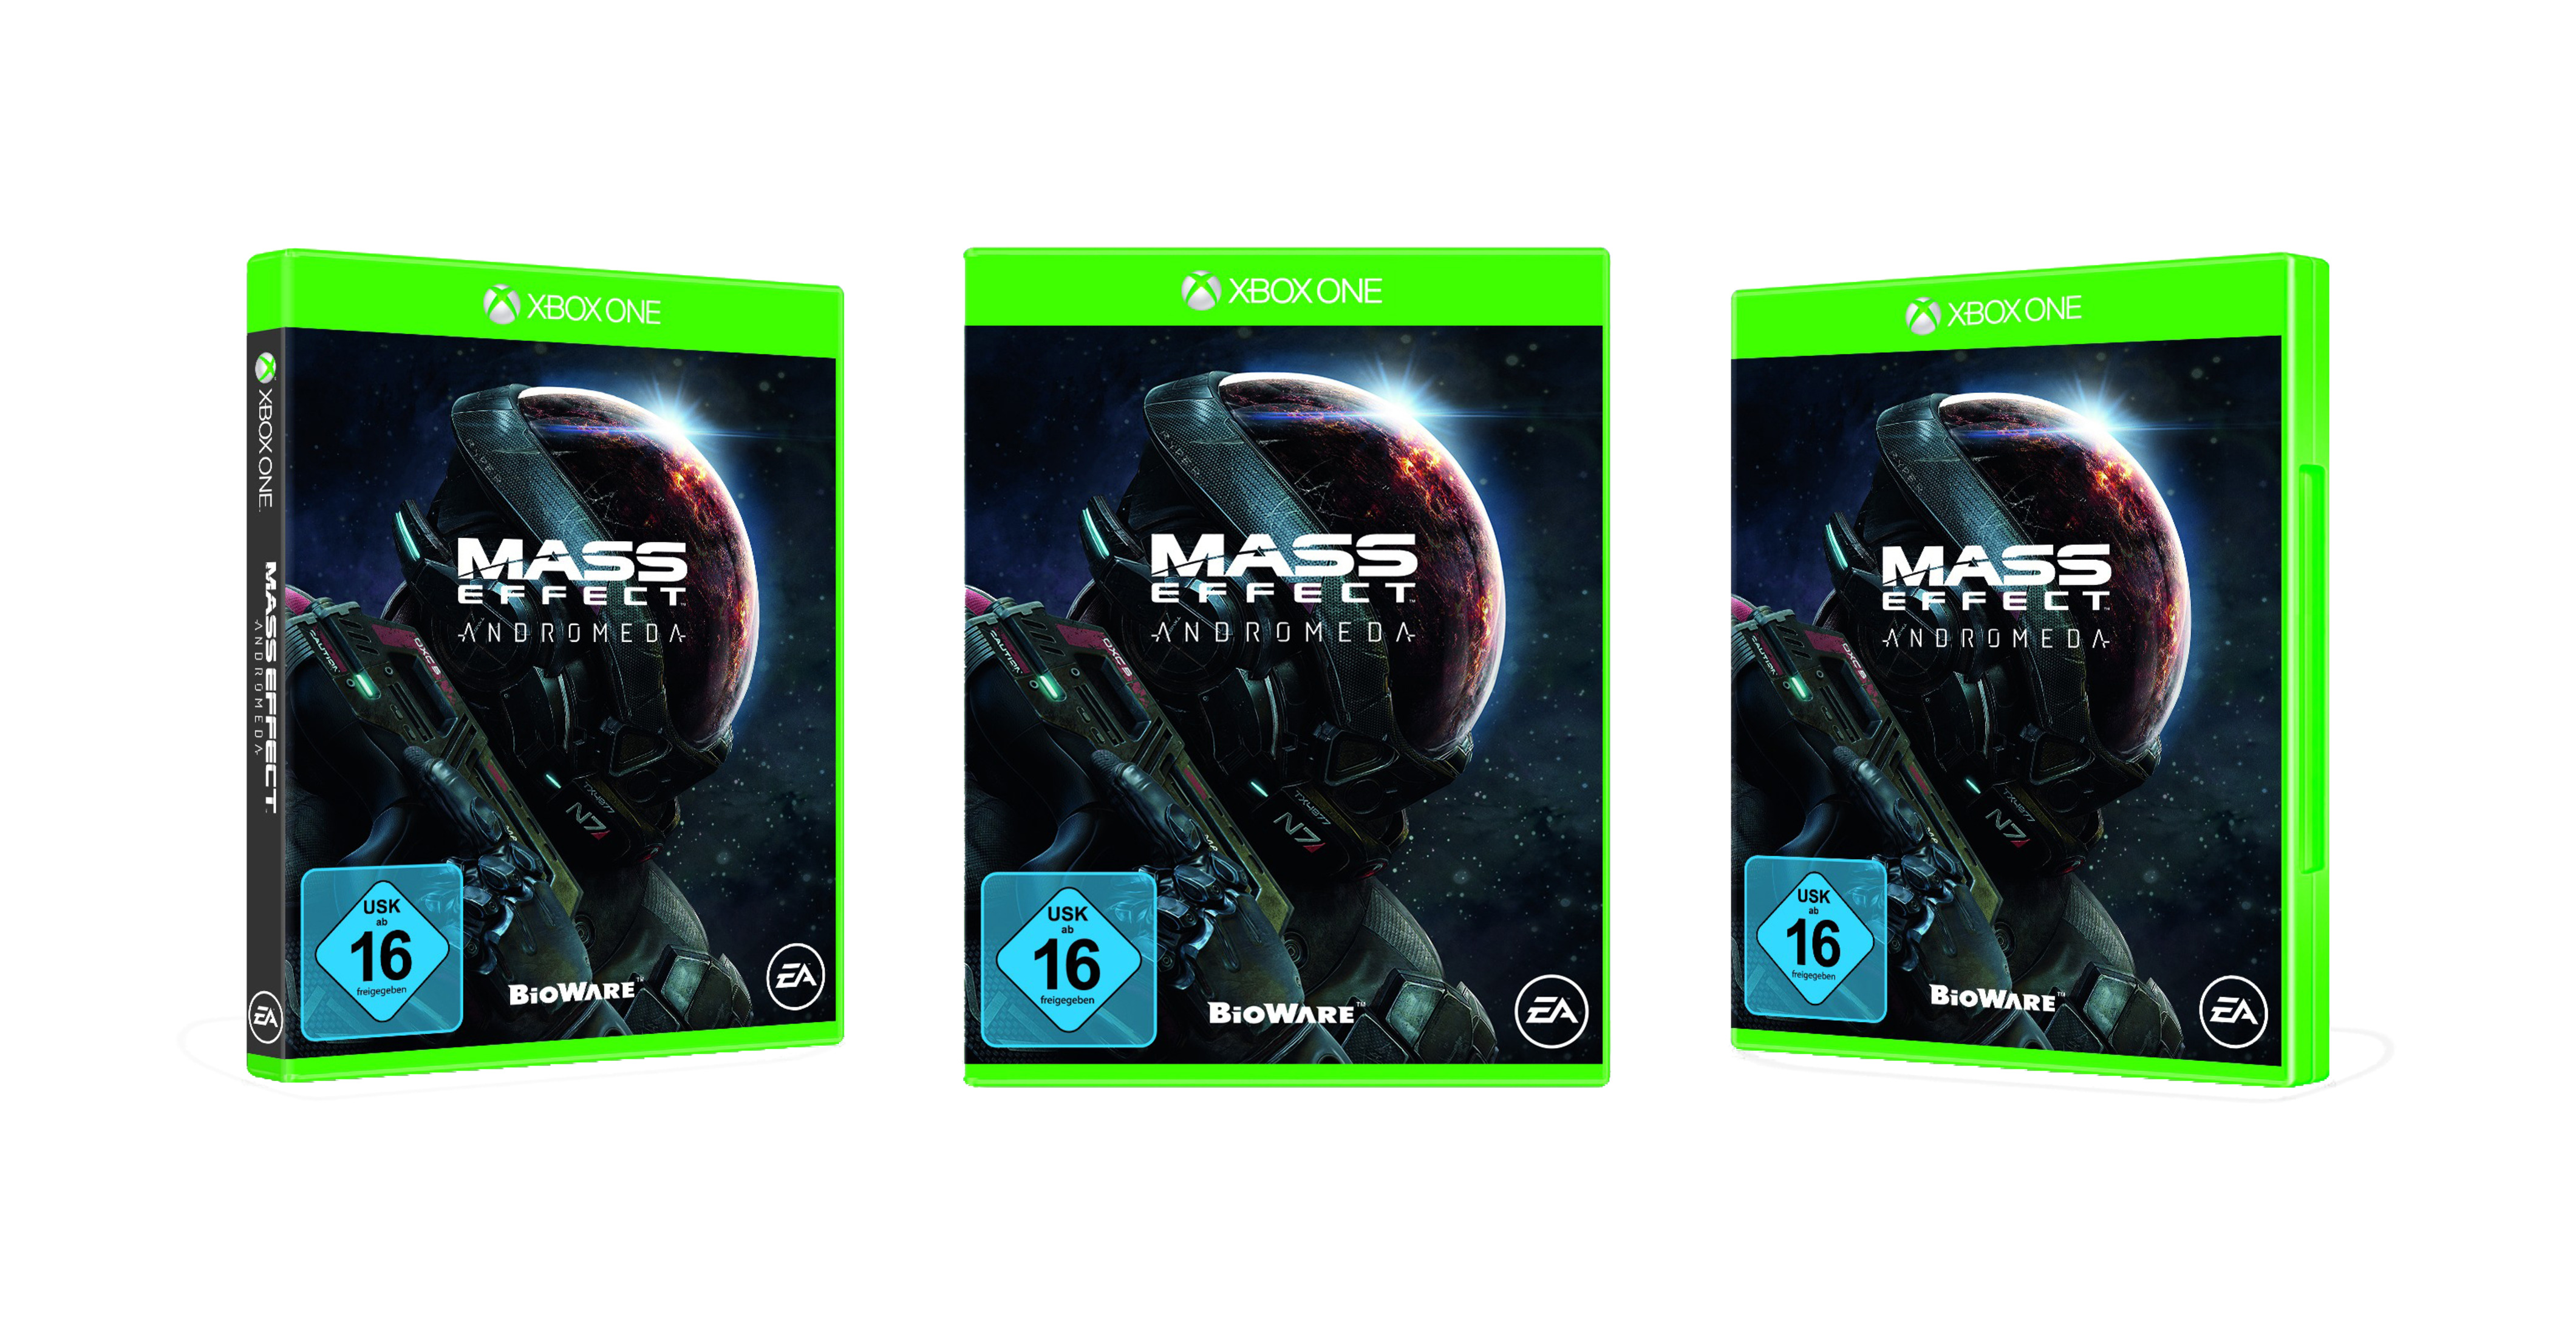 Mass Effect - Andromeda [Xbox One]